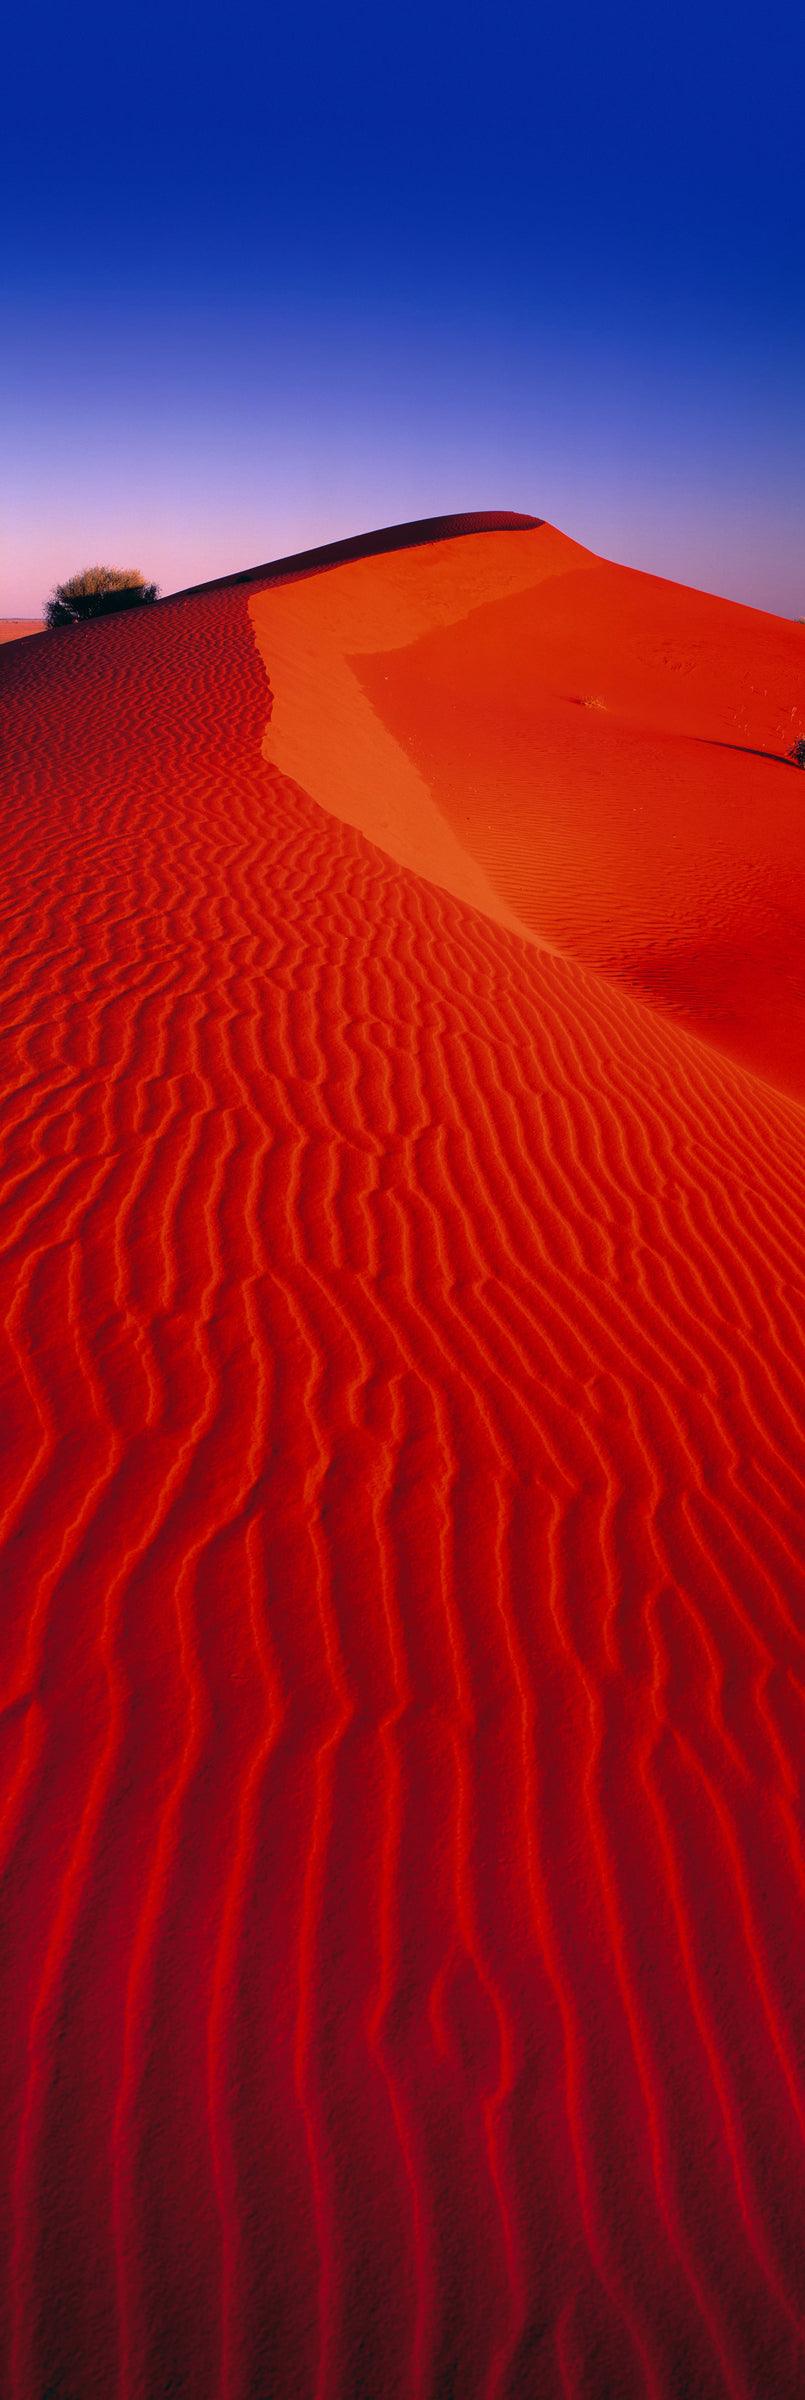 Red windswept sand dune in the Simpson Desert Australia below a purple and blue sky